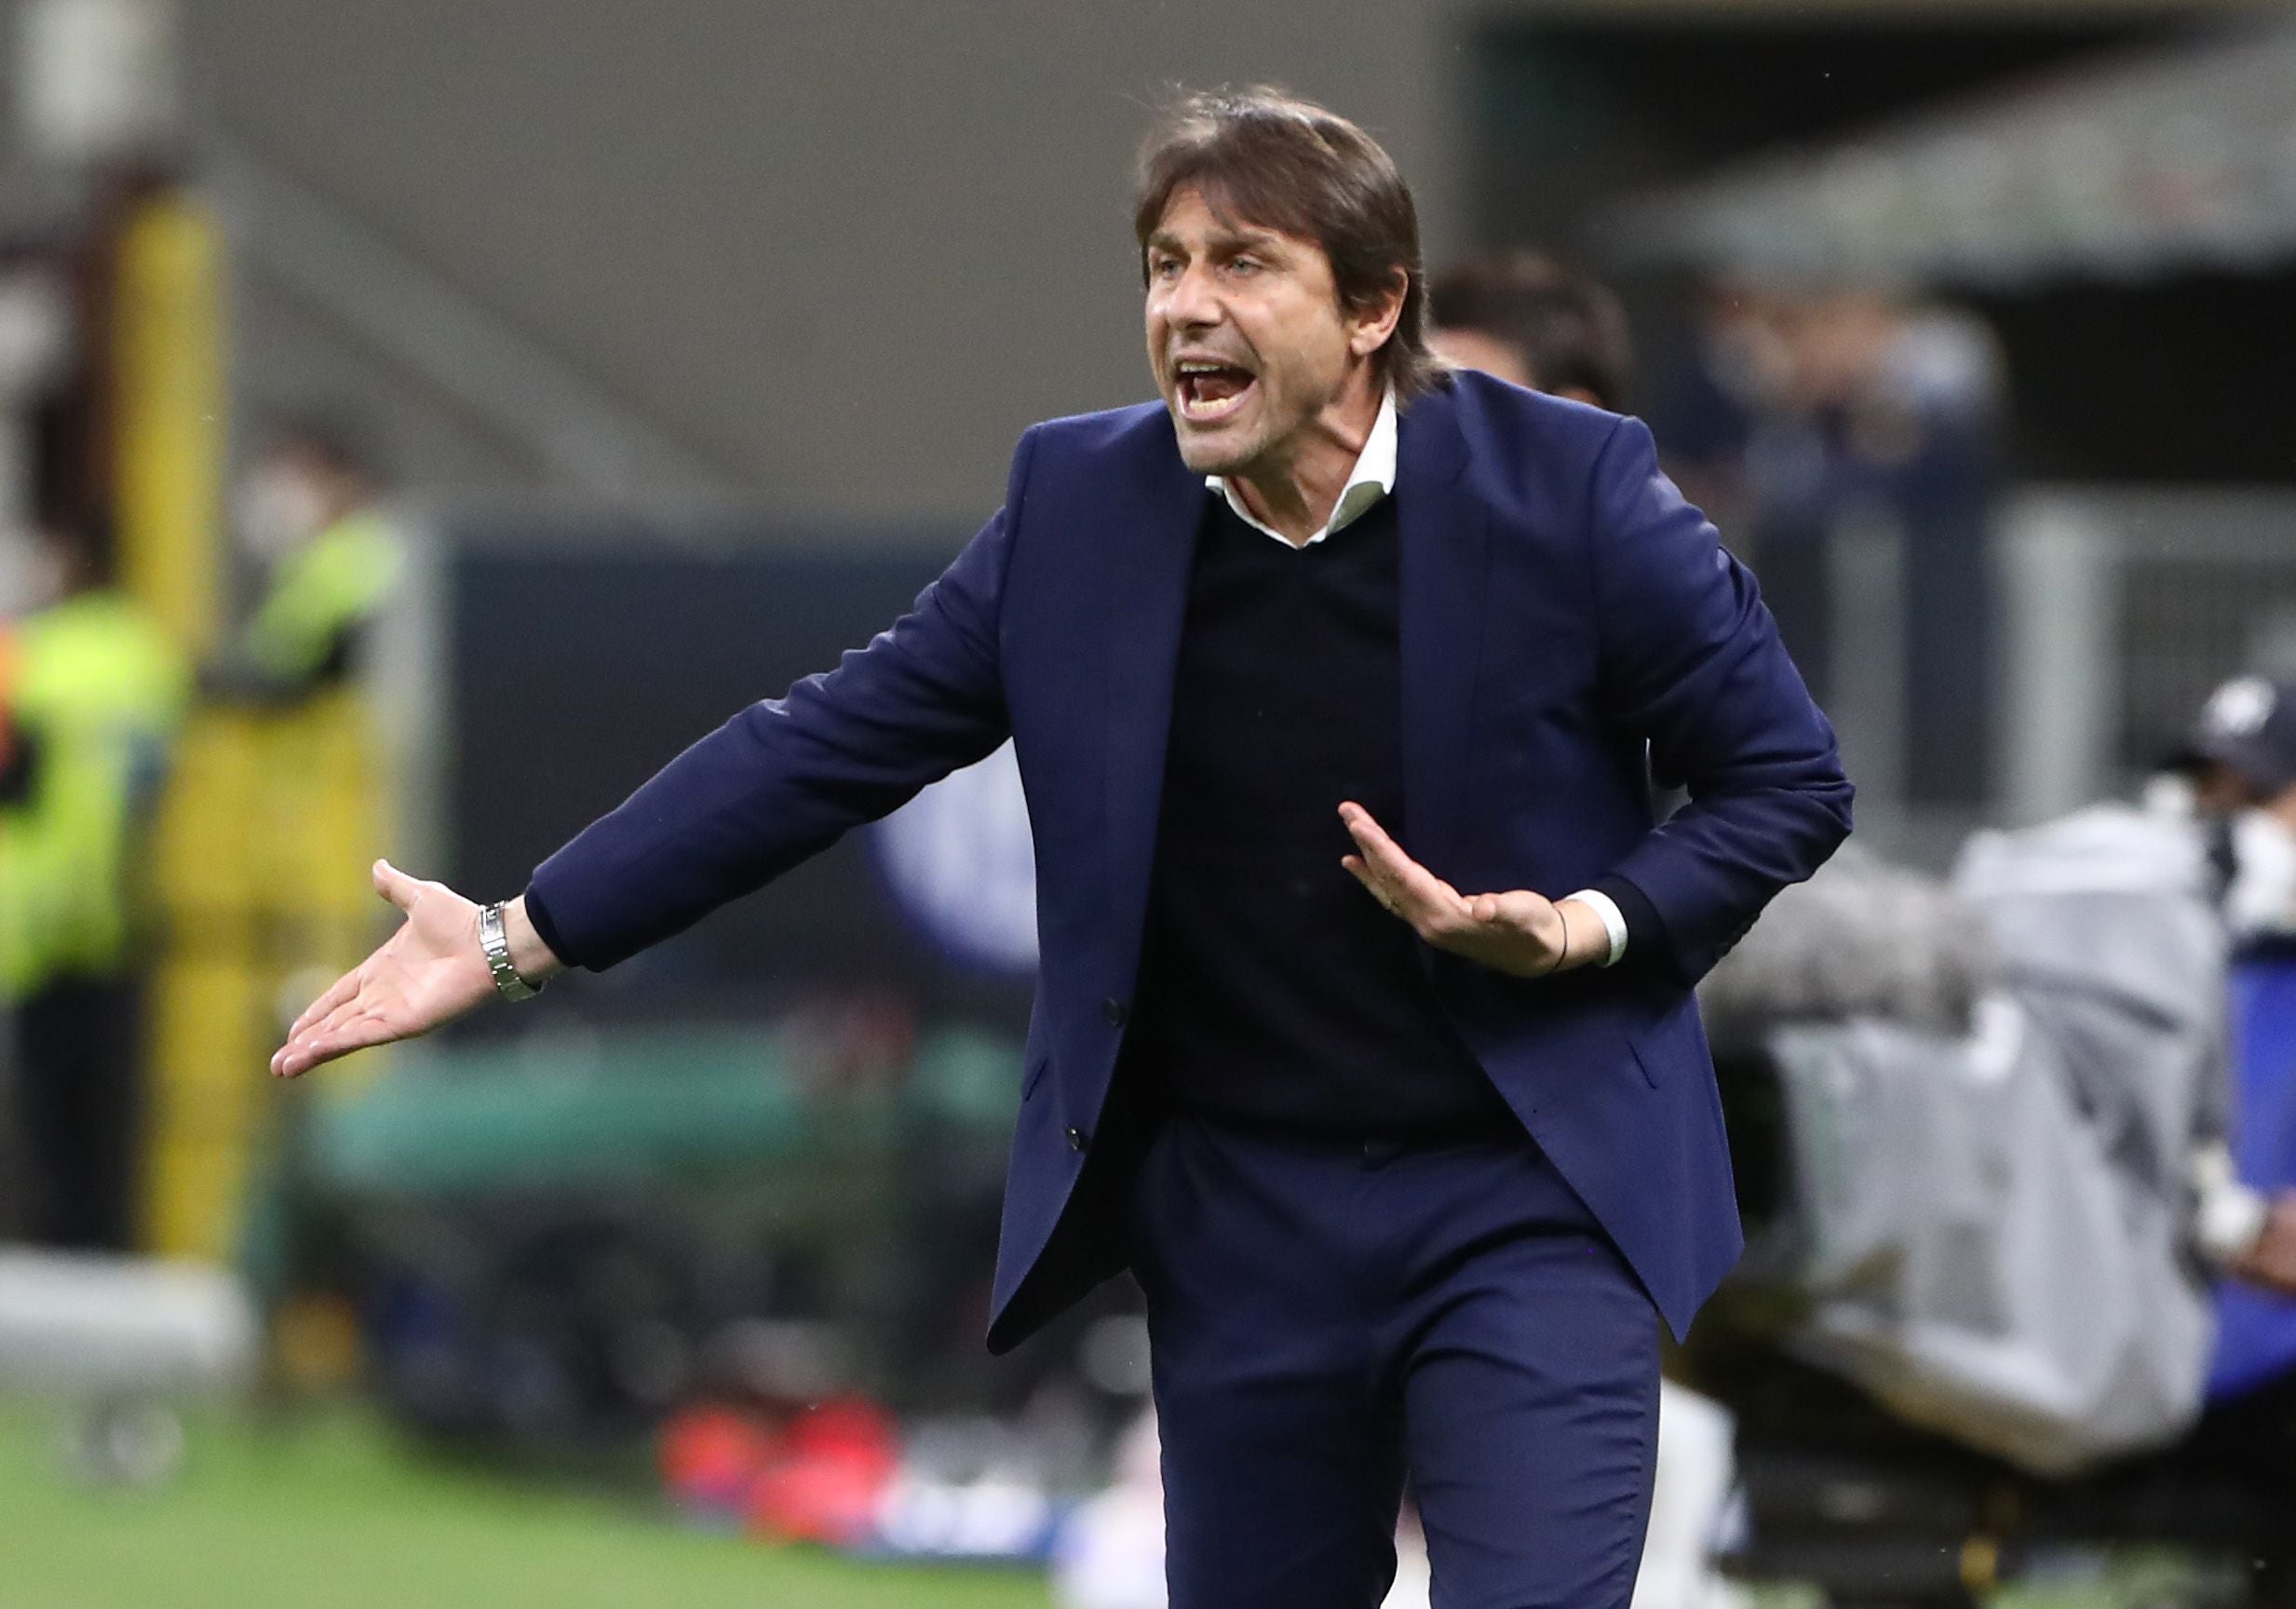 Conte was rumoured to become Tottenham’s new manager